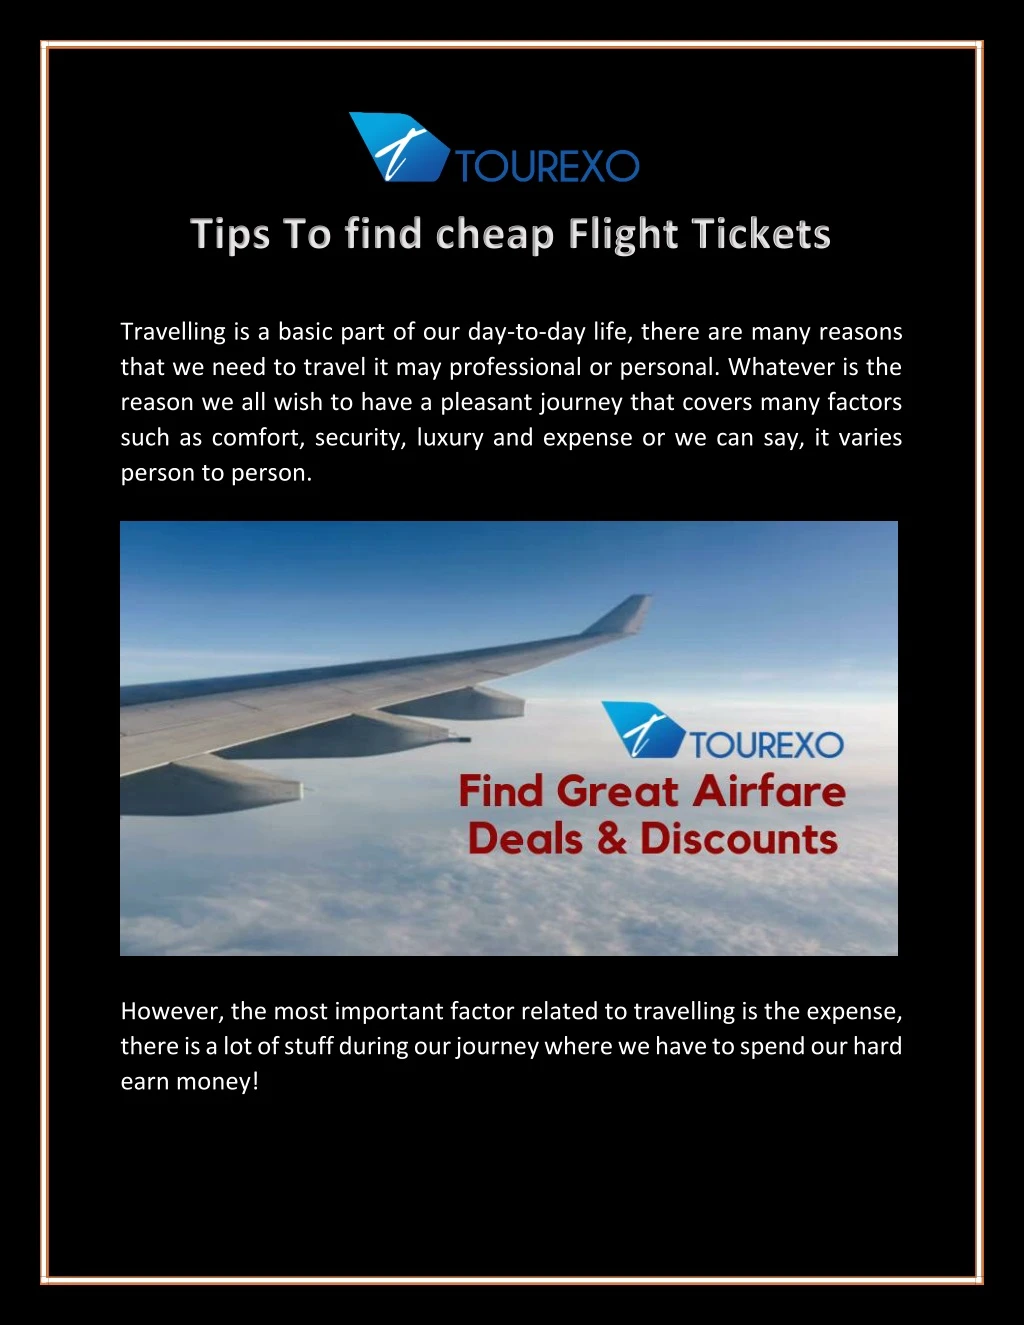 tips to find cheap flight tickets